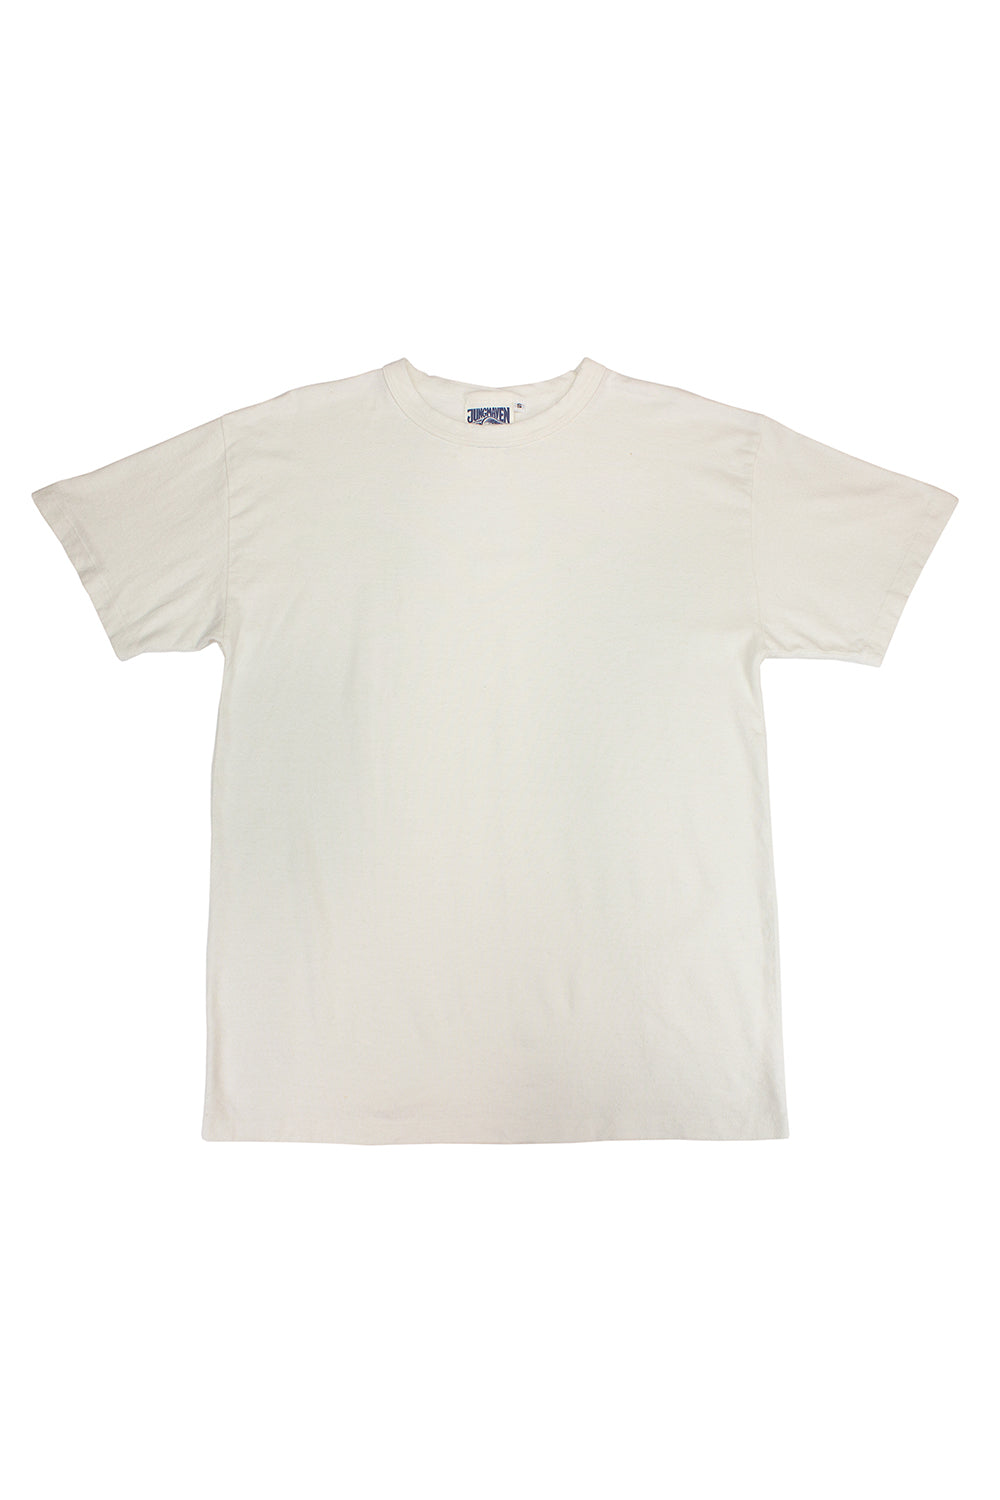 Oversized Tee | Jungmaven Hemp Clothing & Accessories / Color: Washed White